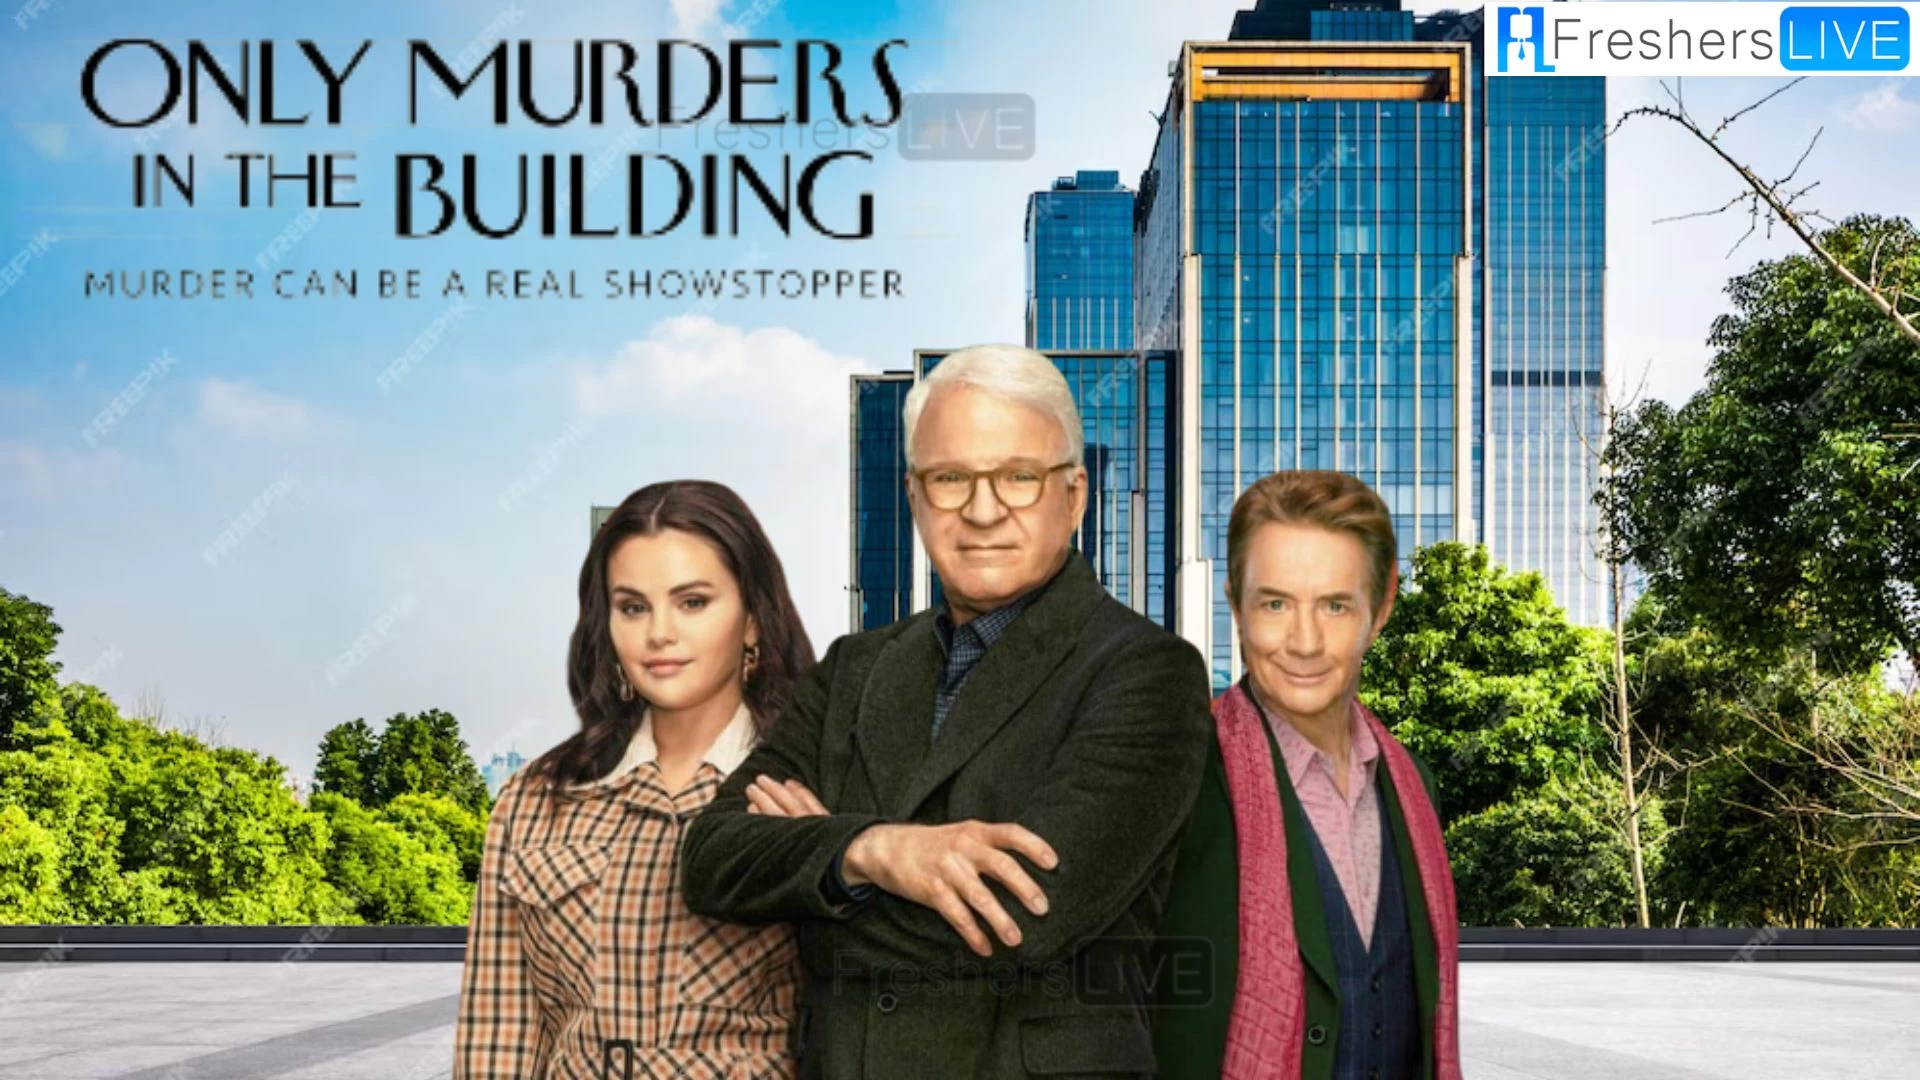 Only Murders in the Building Season 3 Episode 10 Ending Explained, Release Date, Cast, Plot, Review, Where to Watch and More